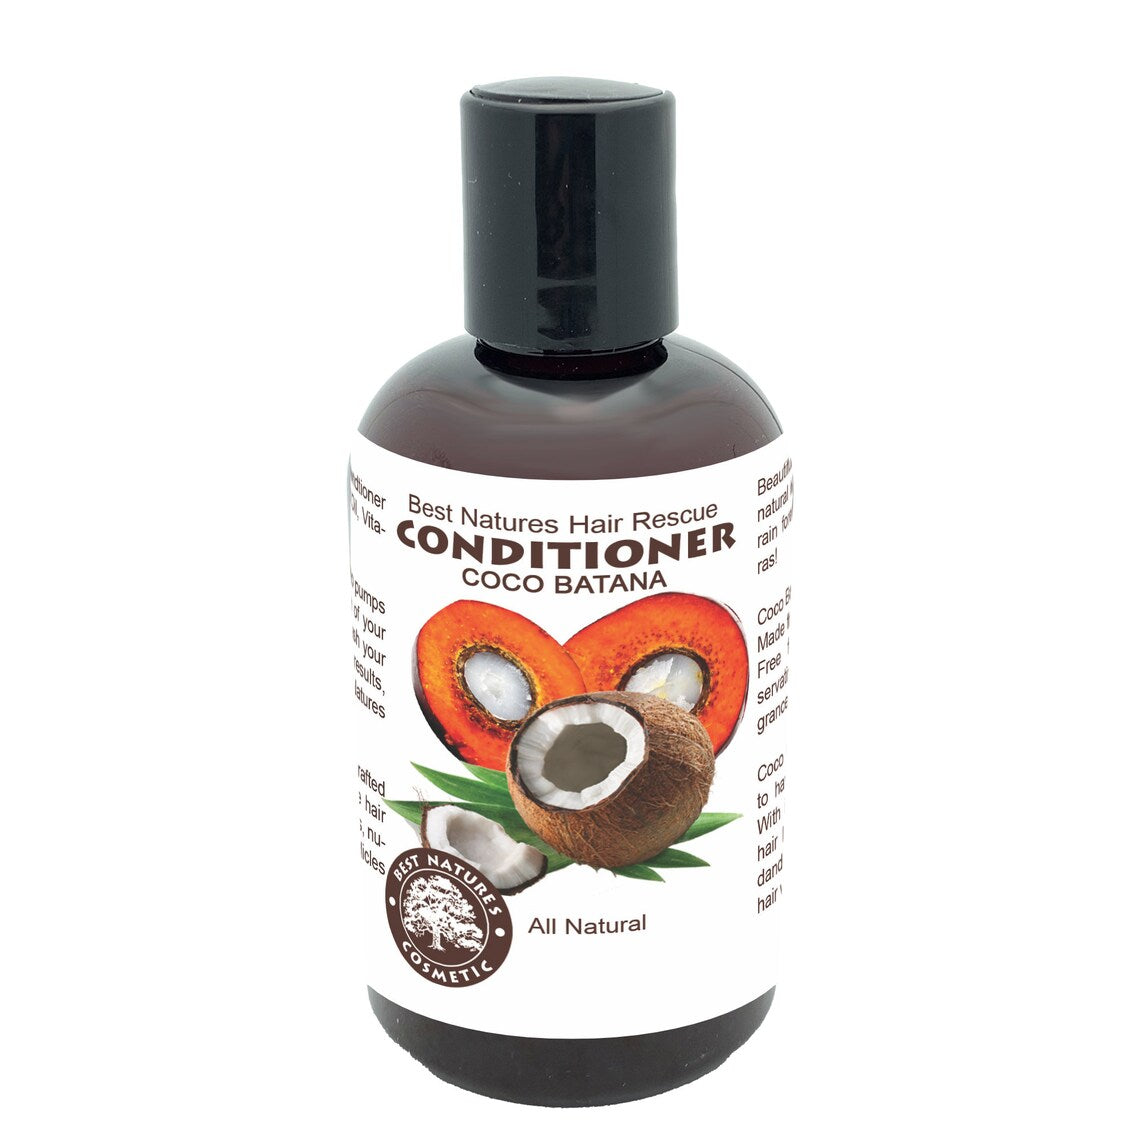 COCO BATANA Conditioner - hair growth, strengthens hair, restoring vitality to dry and damaged hairs, reduce hair loss...